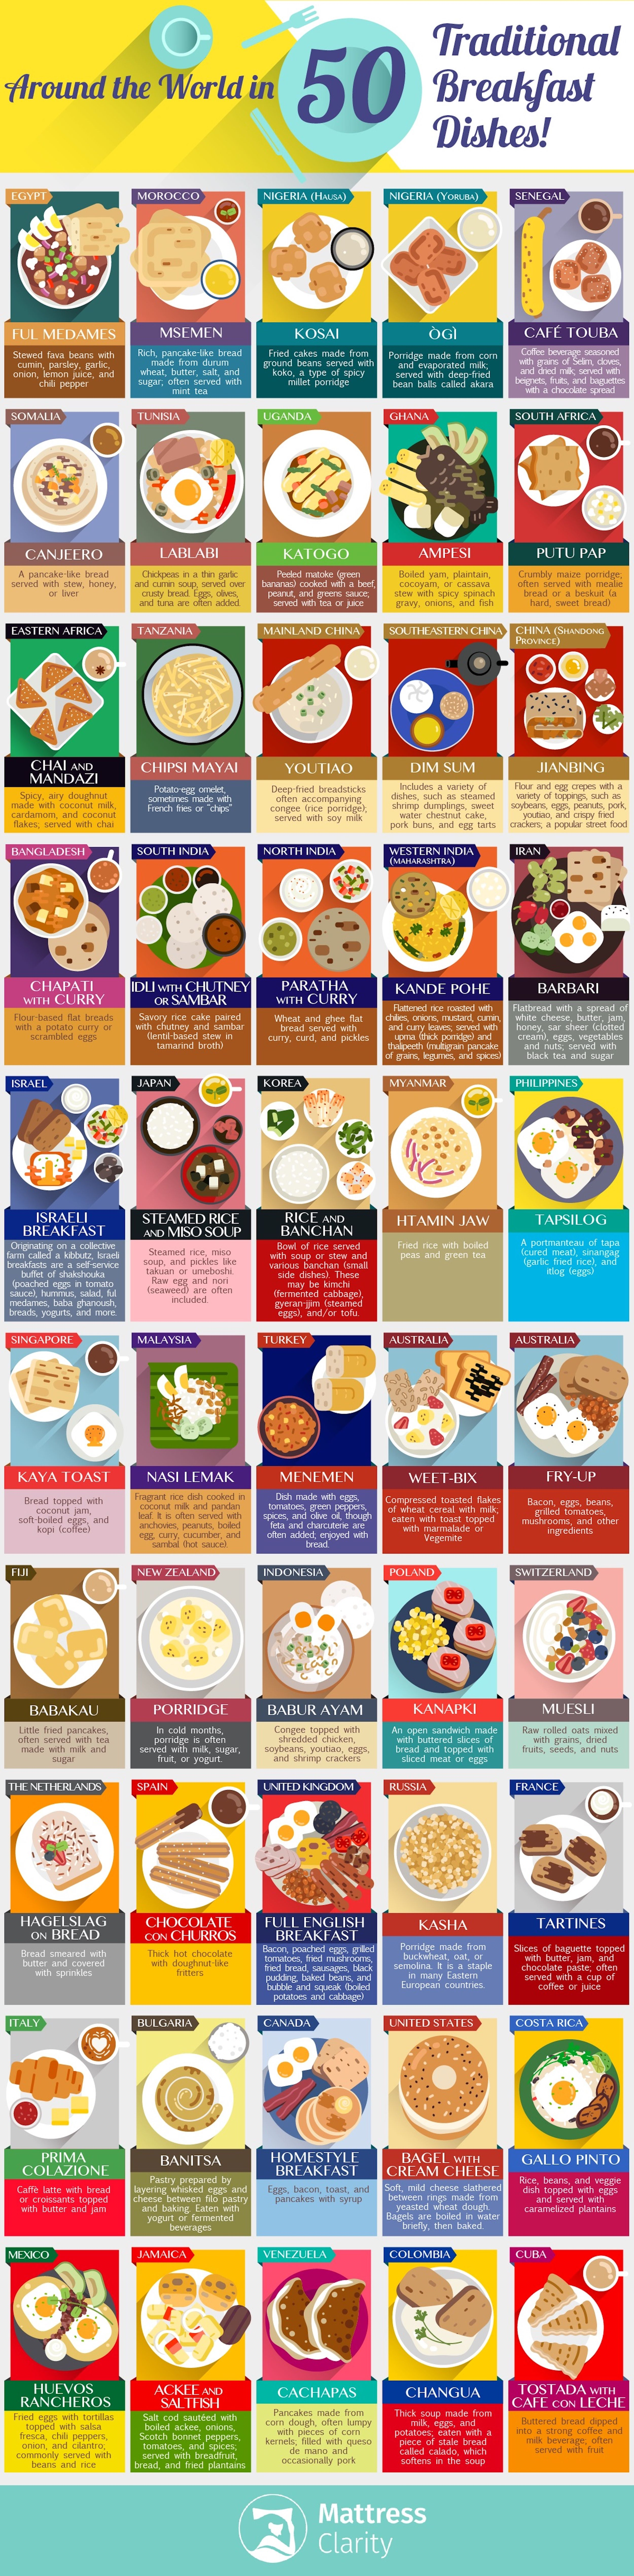 Traditional breakfasts from around the world